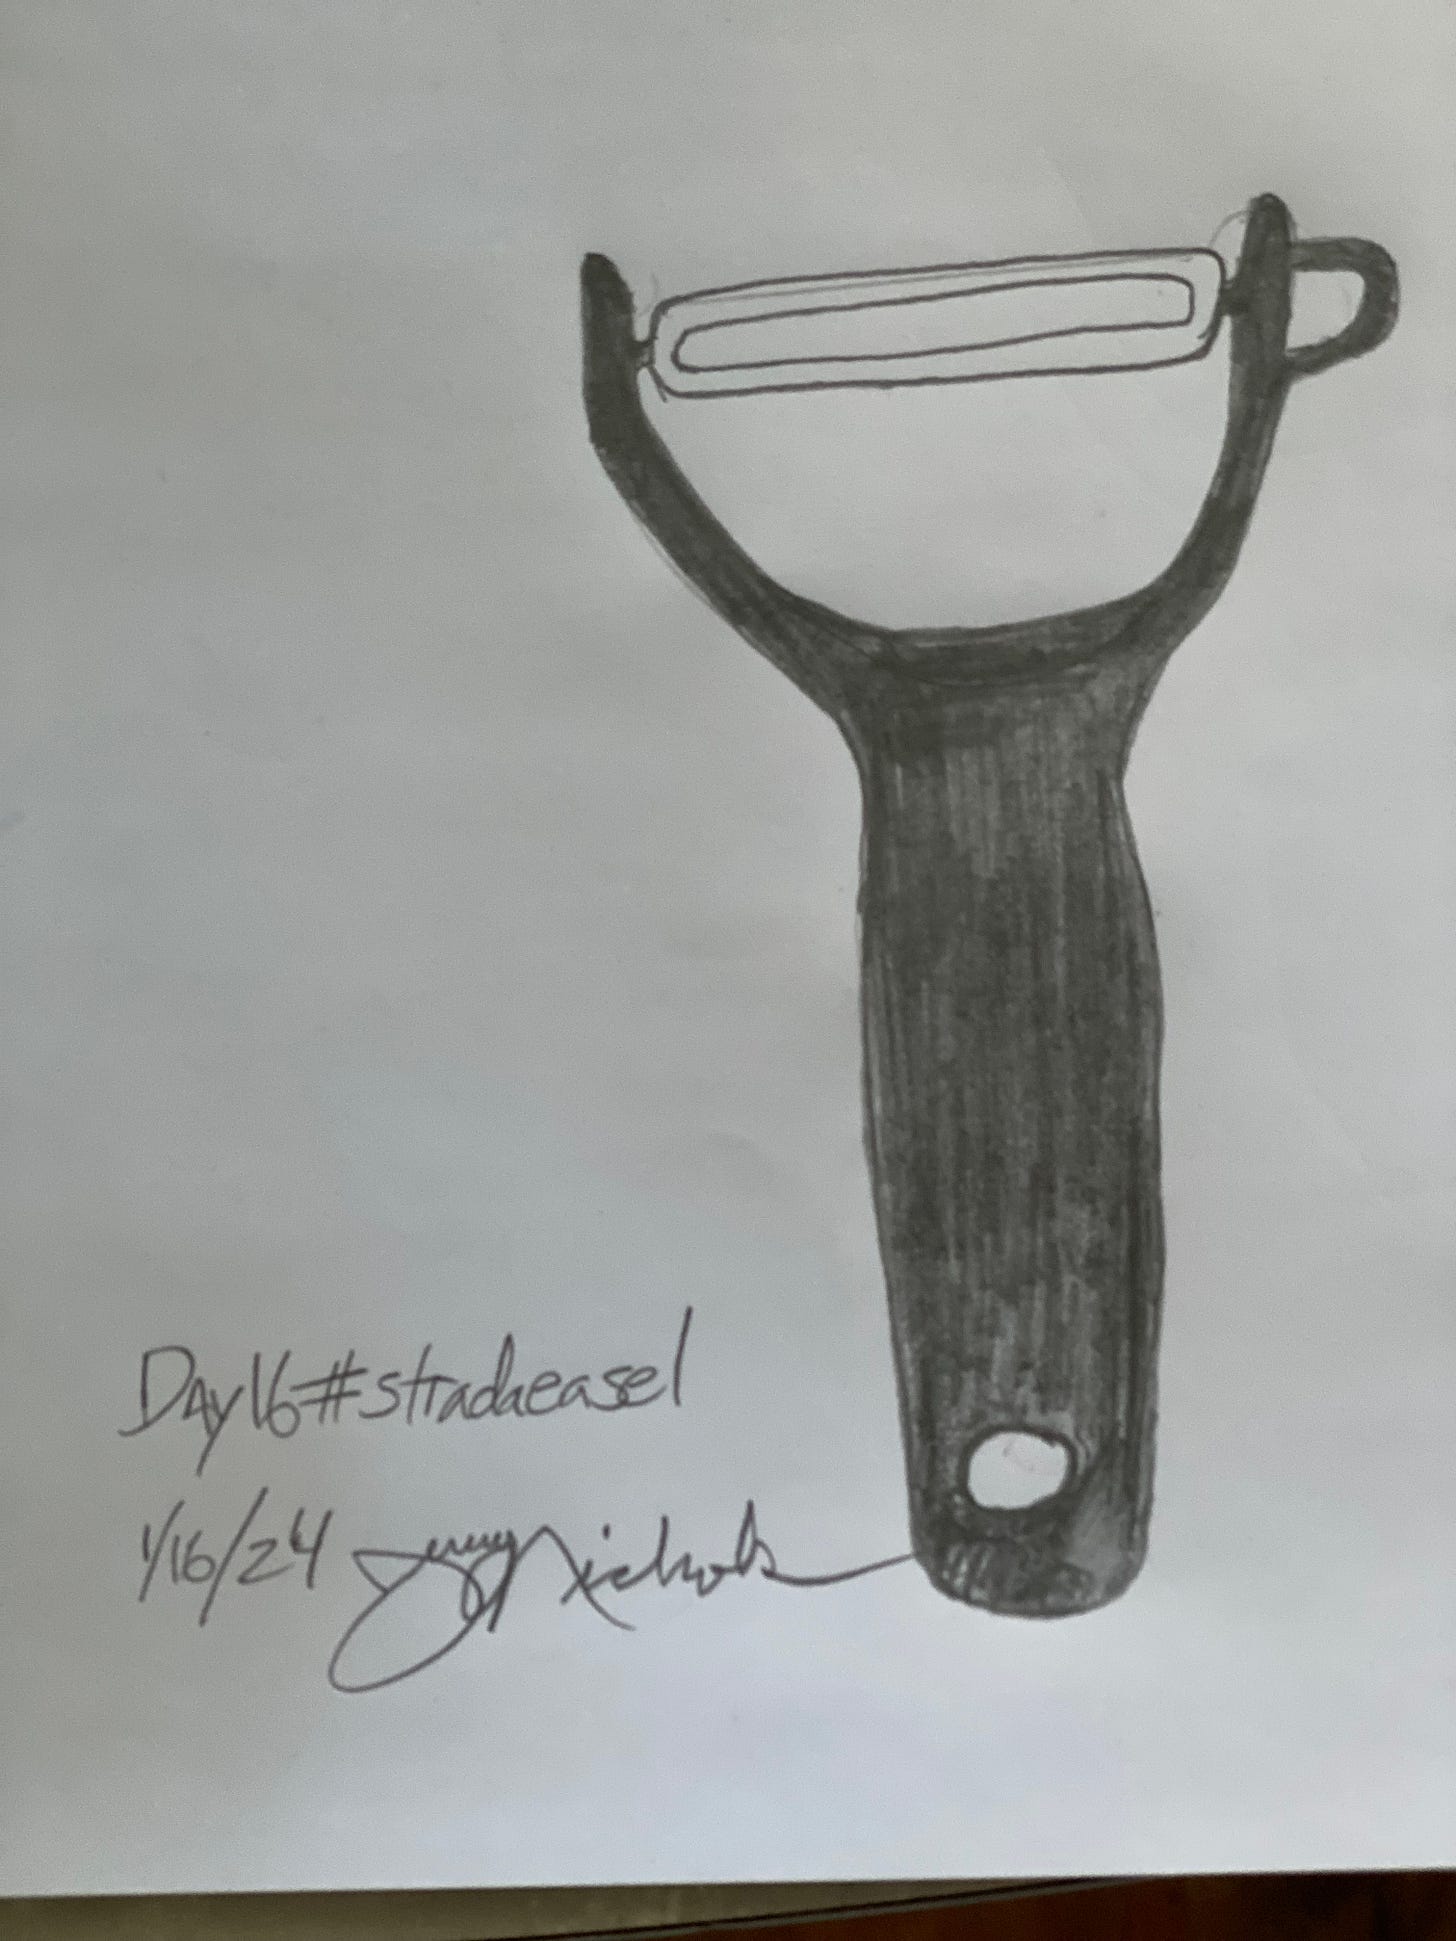 Pencil drawing of an ambidextrous vegetable peeler.